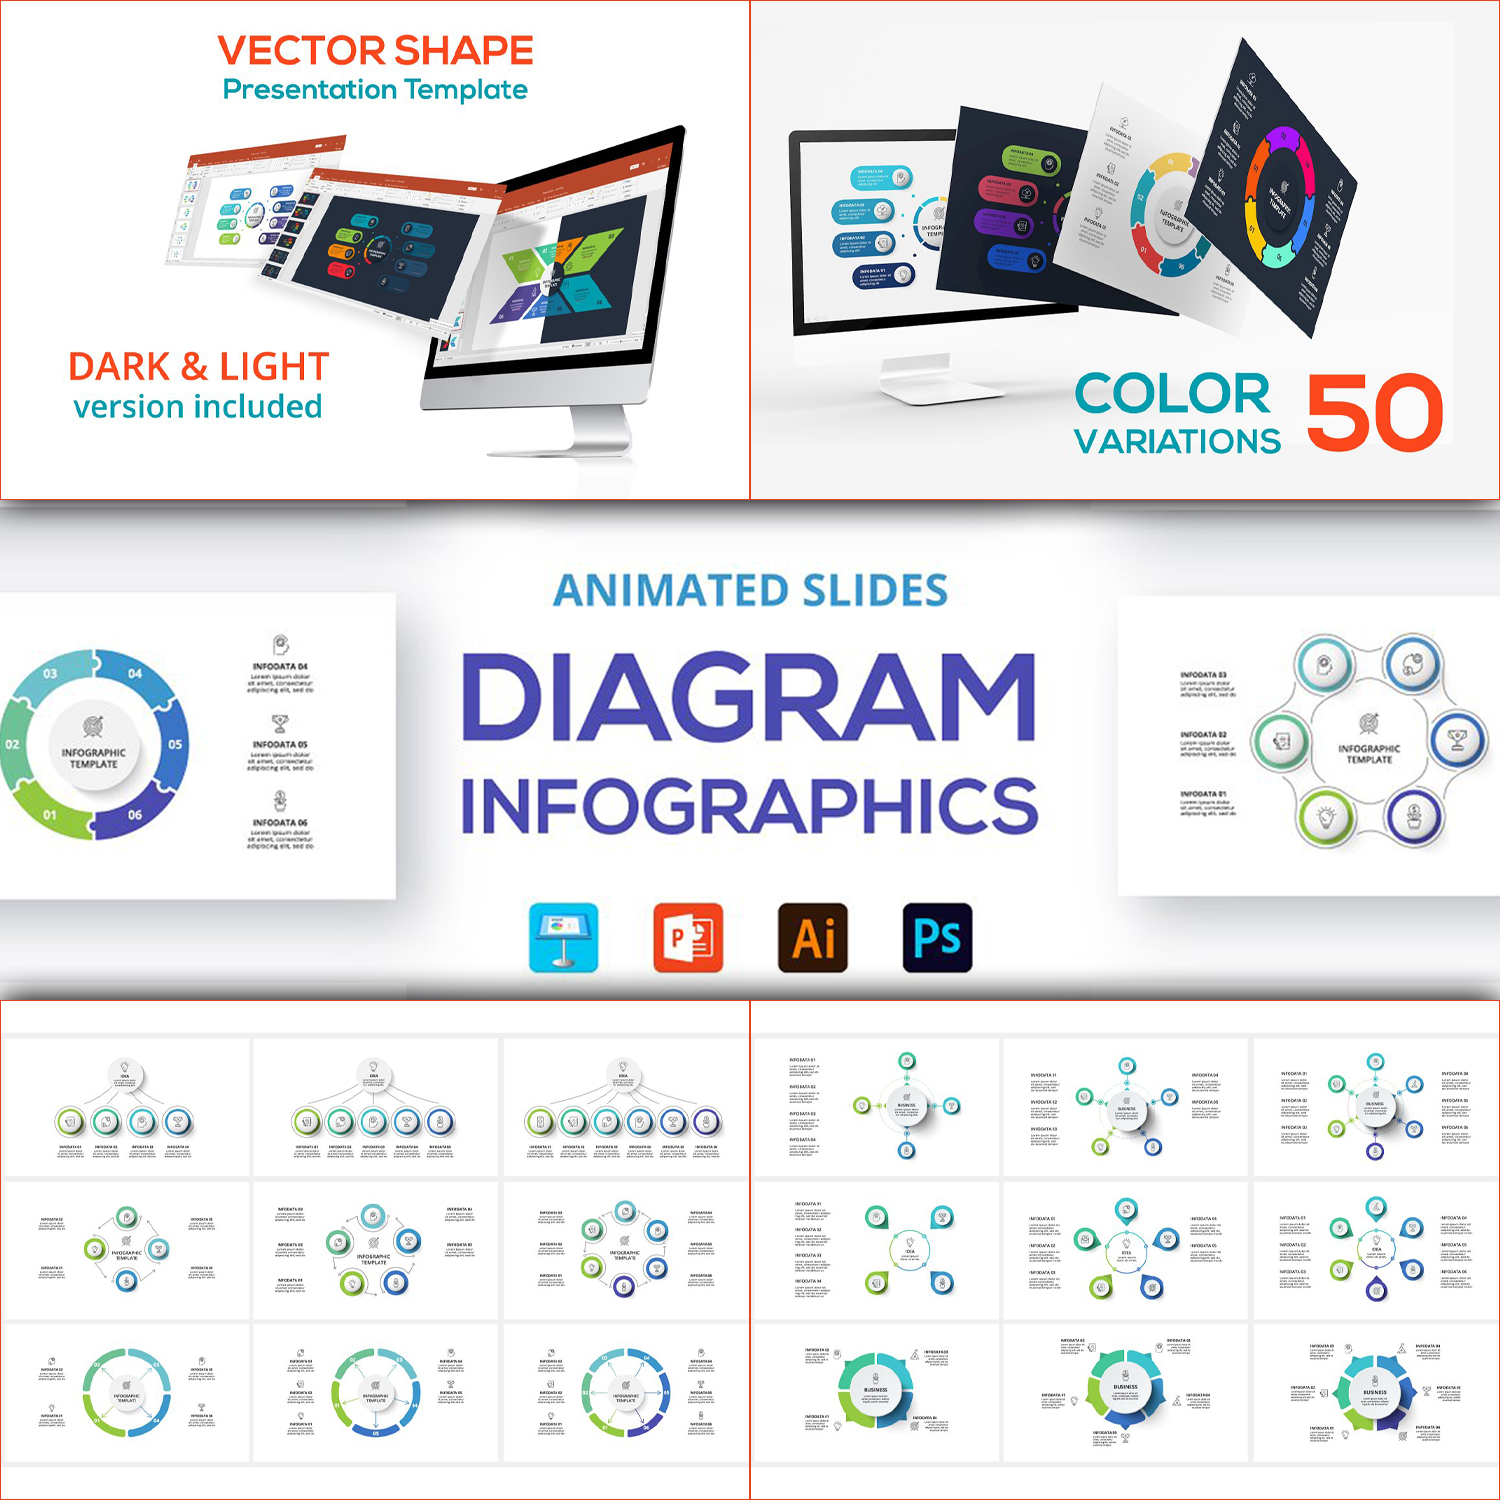 Diagrams animated infographics preview.